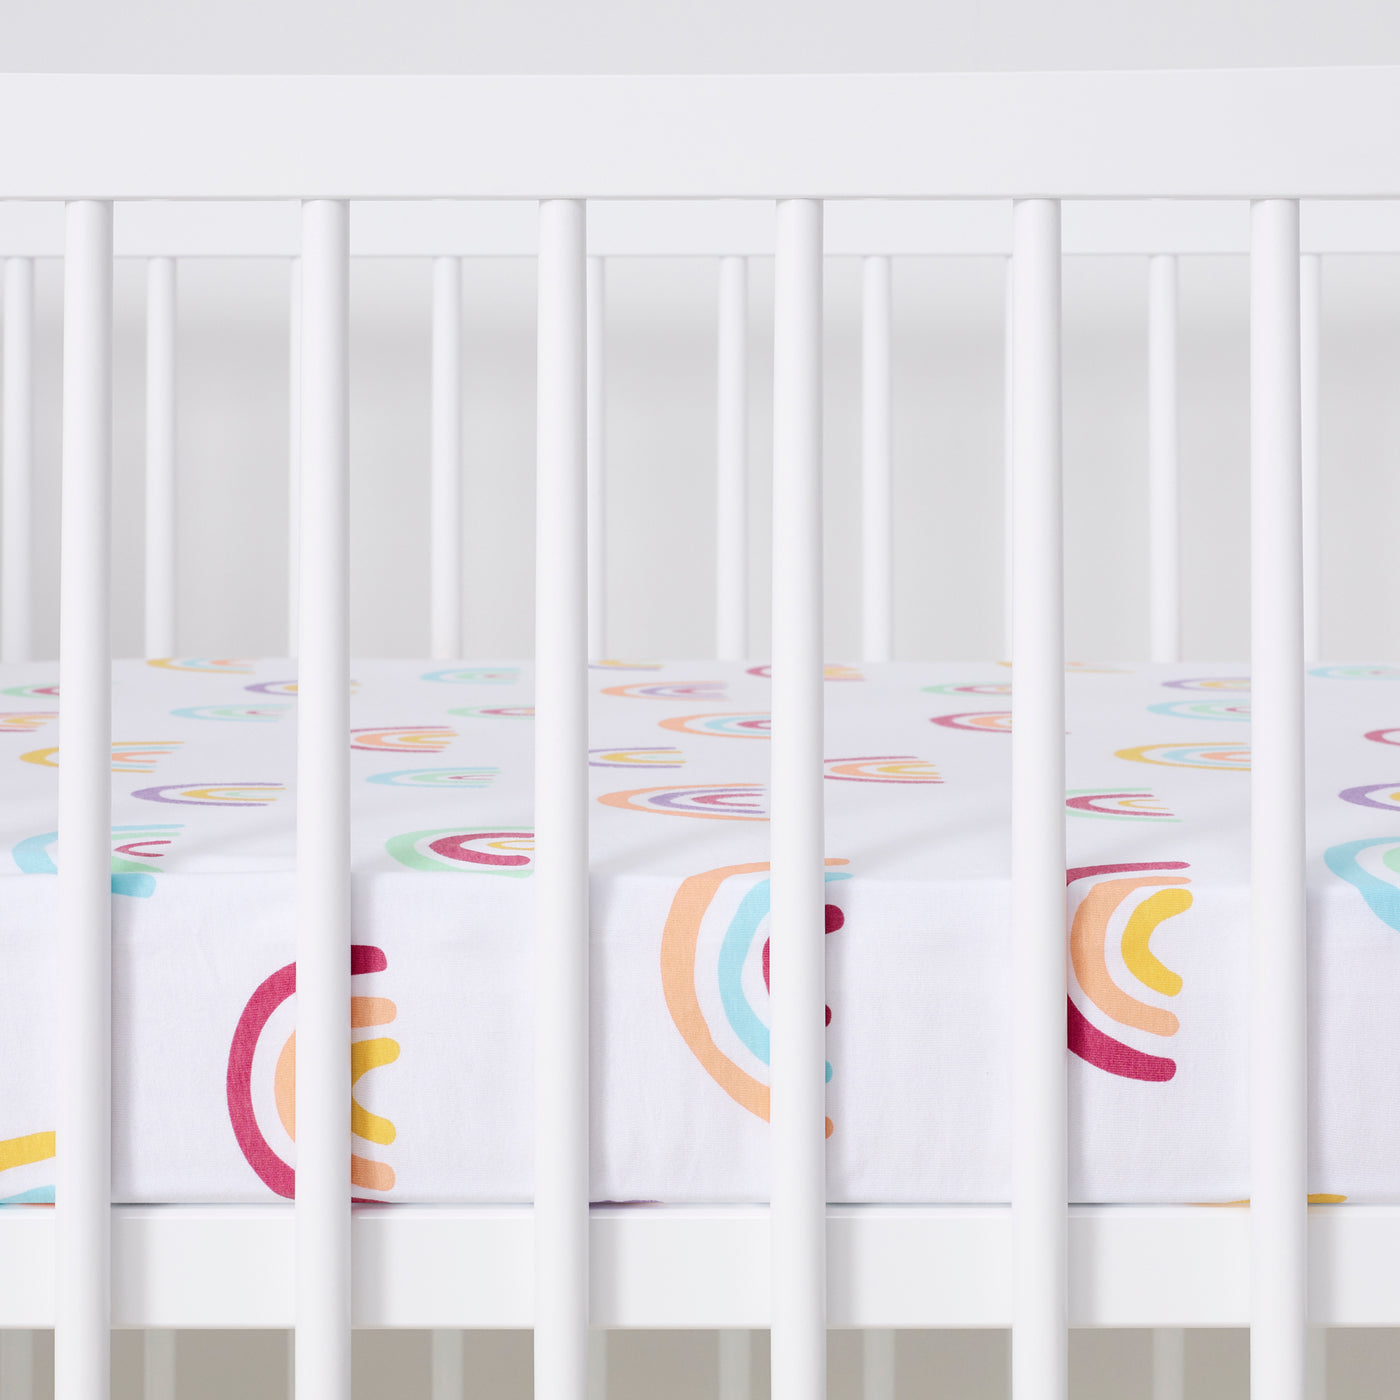 Snuz 2 Pack Cot & Cot Bed Fitted Sheet - Rainbow